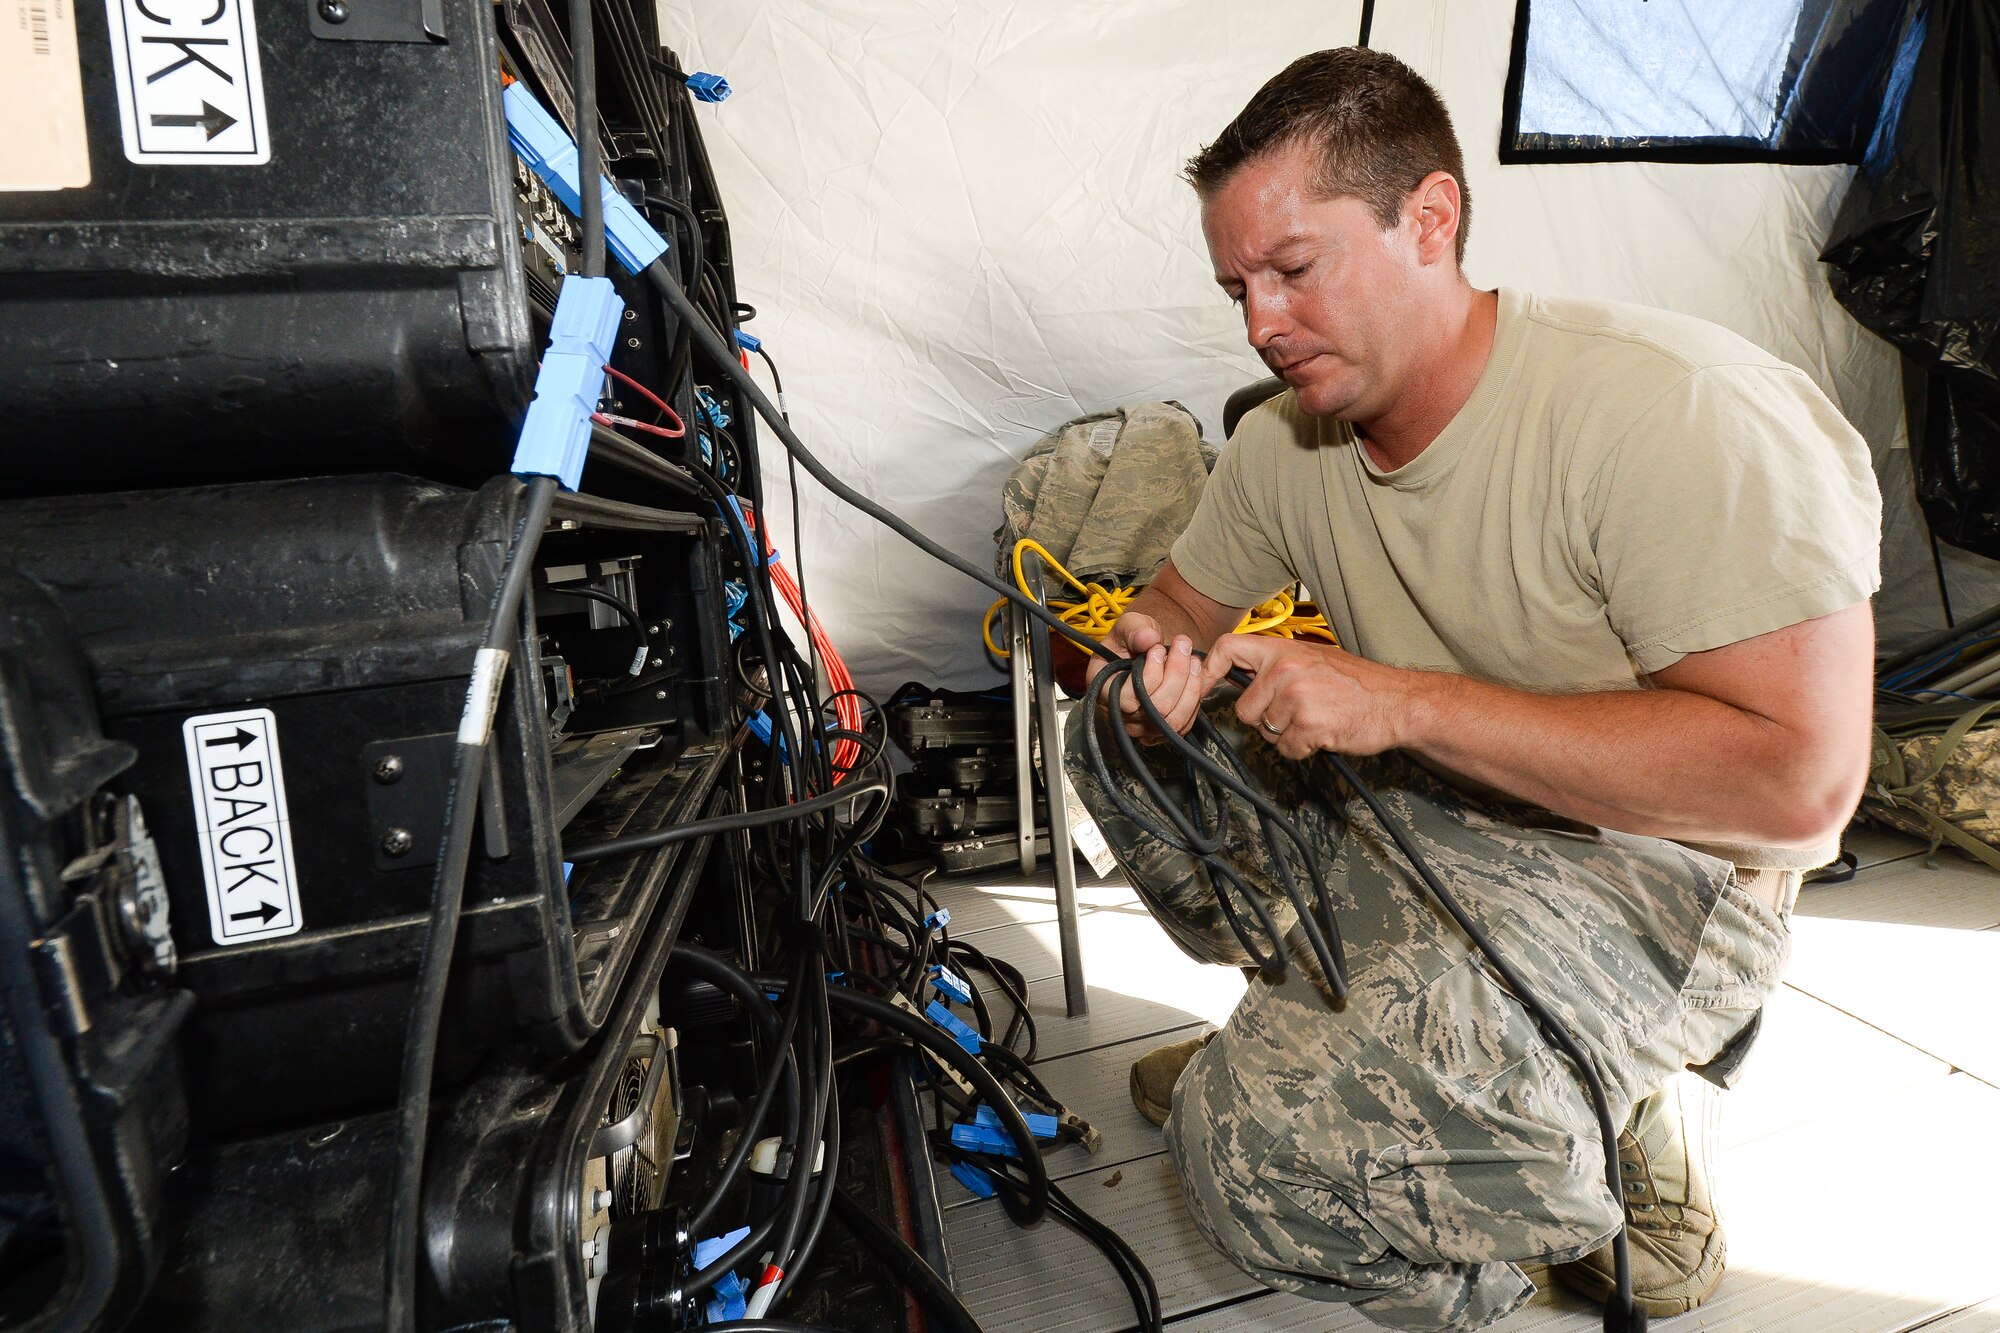 A cyber transport craftsman with the 283rd Combat Communications Squadron (CCS) from Dobbins Air Reserve Base, Georgia Air National Guard, organizes cables during set up of a Theater Deployable Communications System during the Sentry Savannah 15-2 exercise at The Air Dominance Center, Savannah, Ga., May 8, 2015. Sentry Savannah is a National Guard Bureau sponsored training event with a focus on Joint Dissimilar Air Combat Training and 5th Generation Fighter Integration. It offers a chance for fighter pilots to participate in war simulations that depict what they would face in real-world scenarios. During the exercise the 283rd CBCS provided NIPR, SIPR, and voice services to the 117th Air Control Squadron Air Battle Element and extended service to their deployed radar site. Working together the two units provided vital data to help the fighter pilots complete their missions. (U.S. Air National Guard photo by the 116th Air Control Wing Public Affairs/Released) (Name of military member withheld for security purposes)